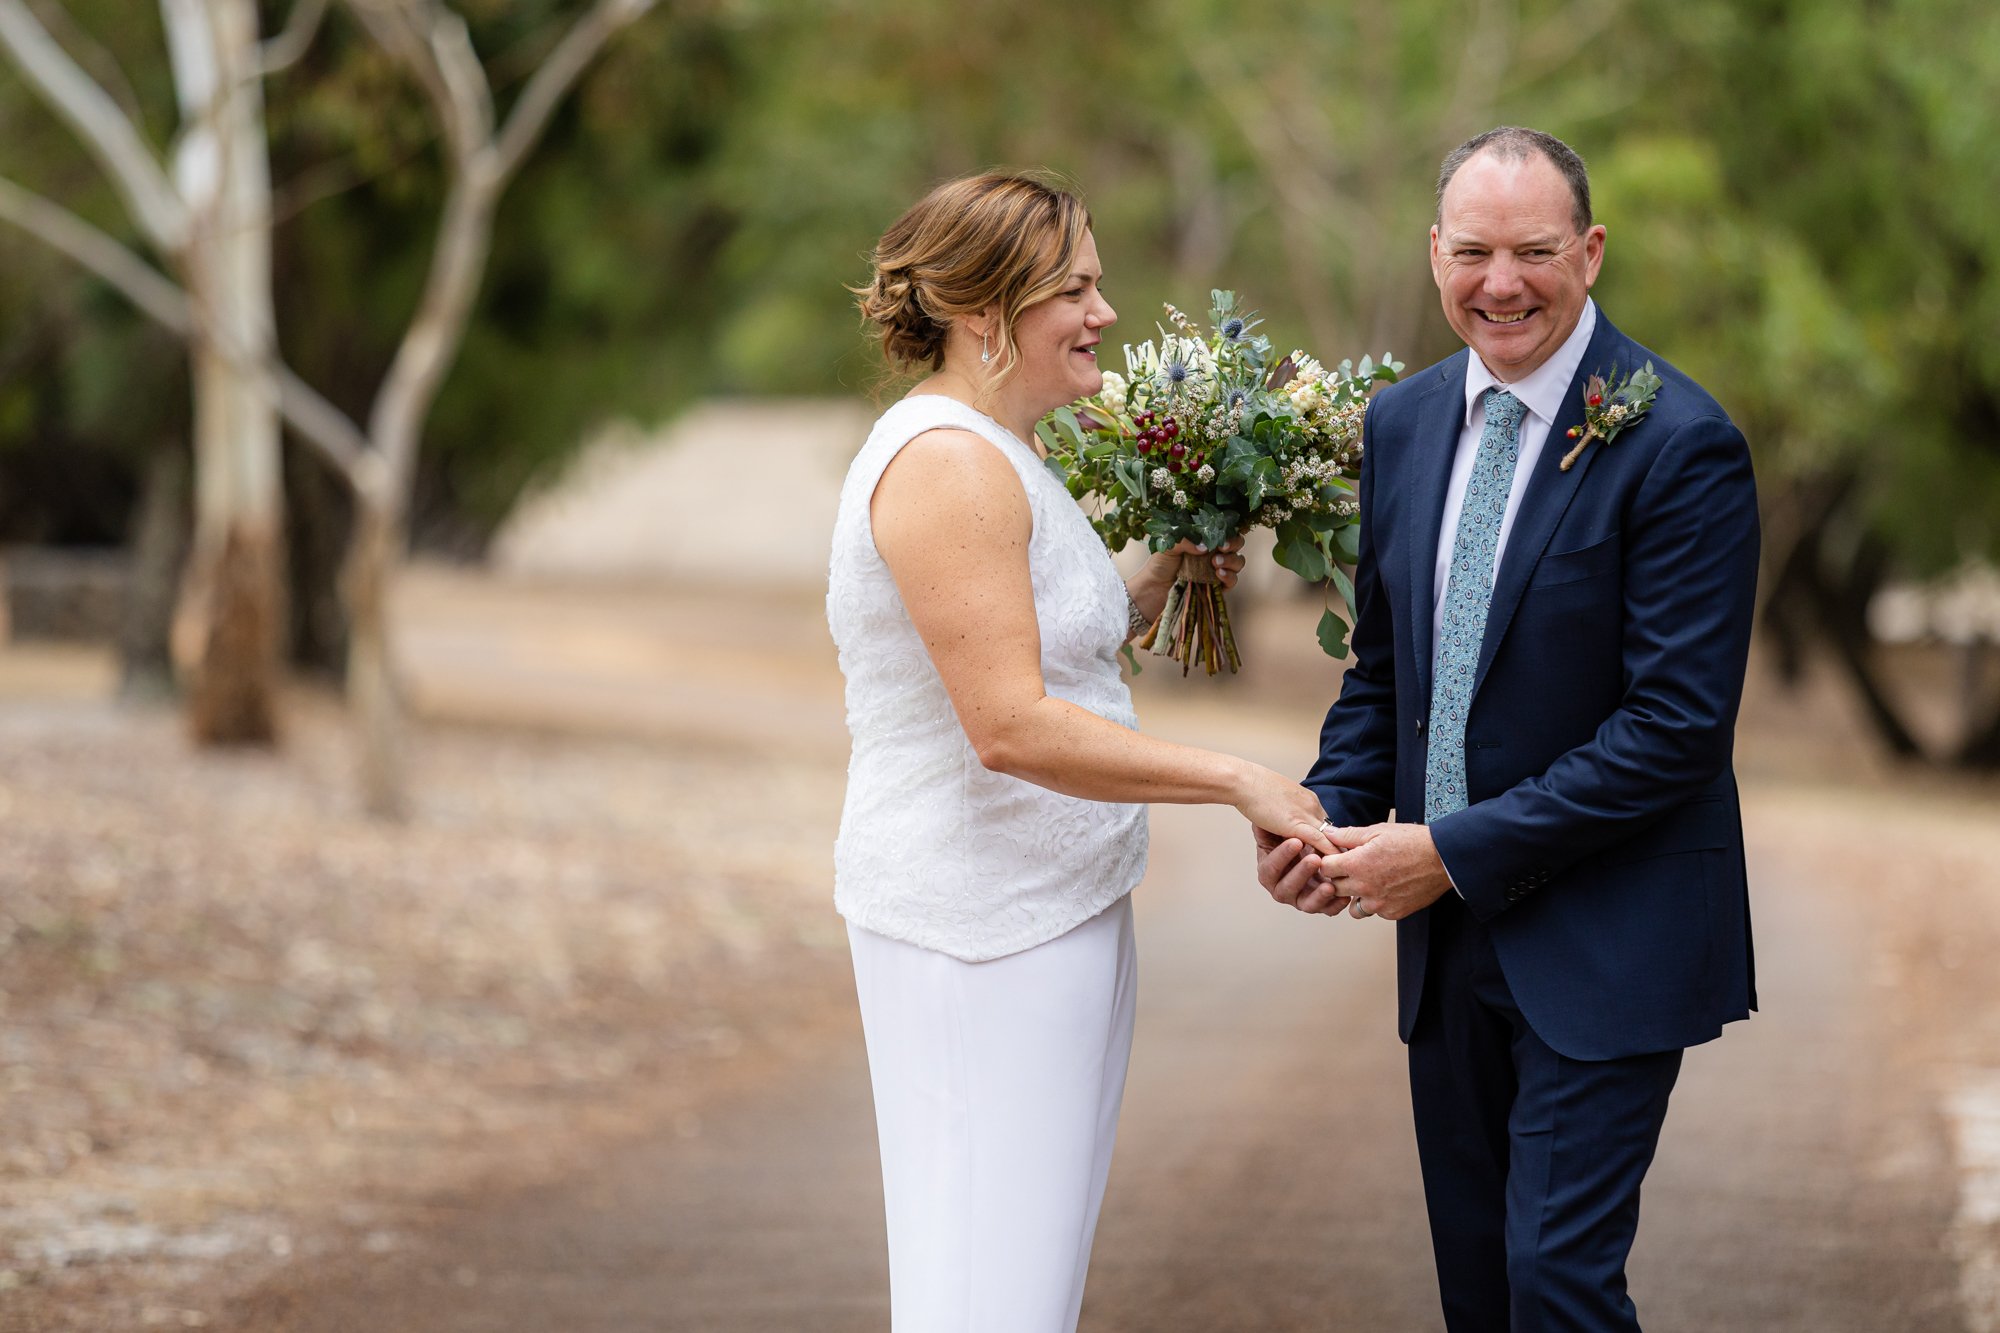 bride holding a bouquet of flowers smiling with groom